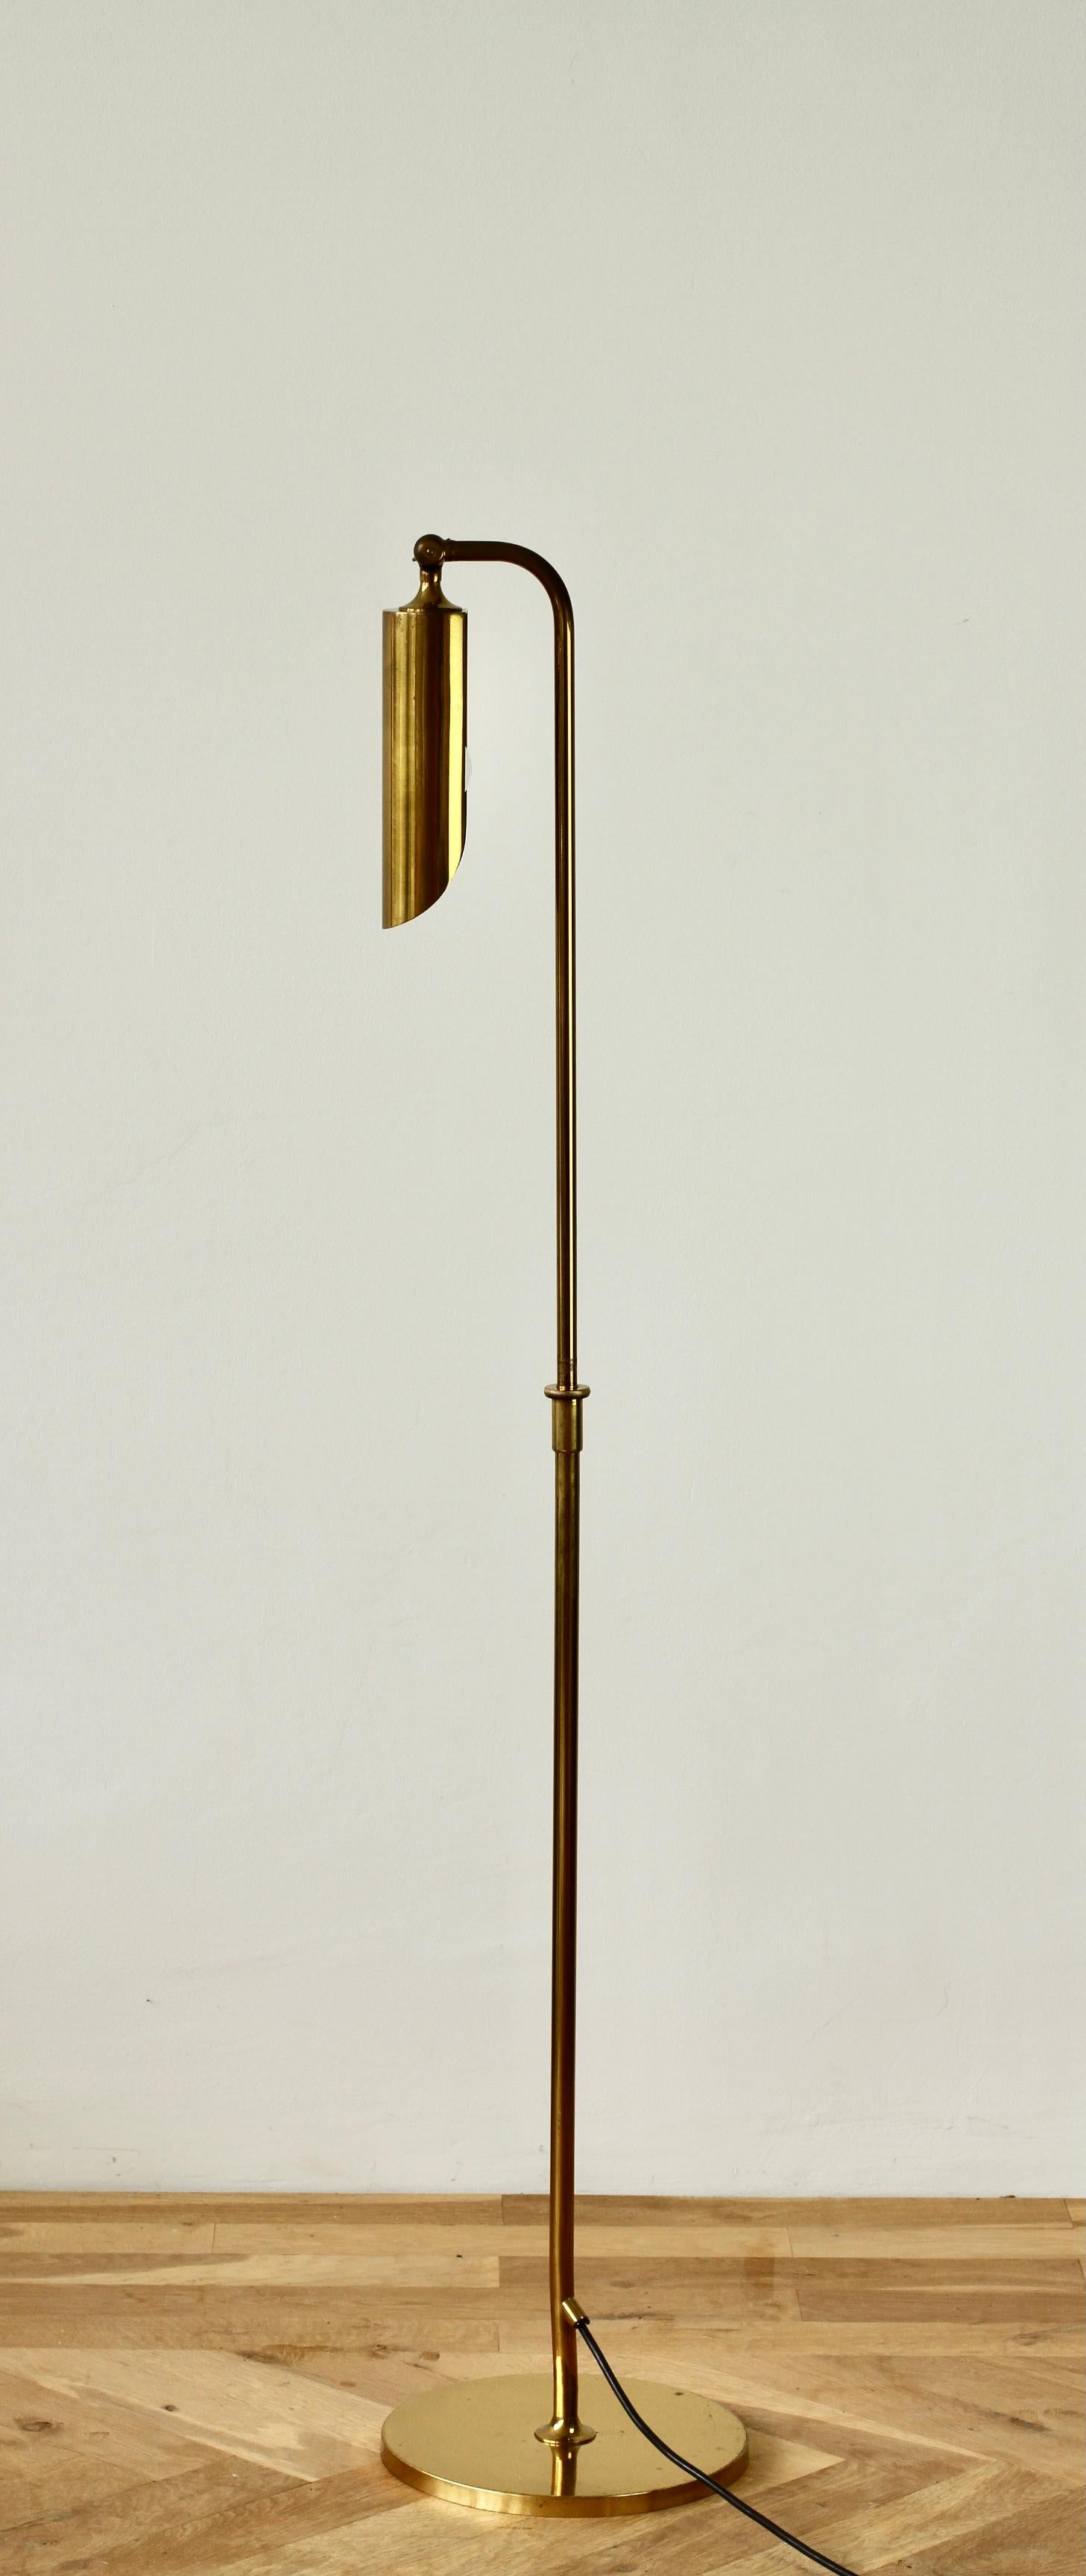 Rare Mid-Century Modern vintage German floor lamp by Florian Schulz circa late 1970s -early 1980s. Featuring polished brass (now with age related patina) and height adjustable as is the round brass shade making this the perfect modernist style